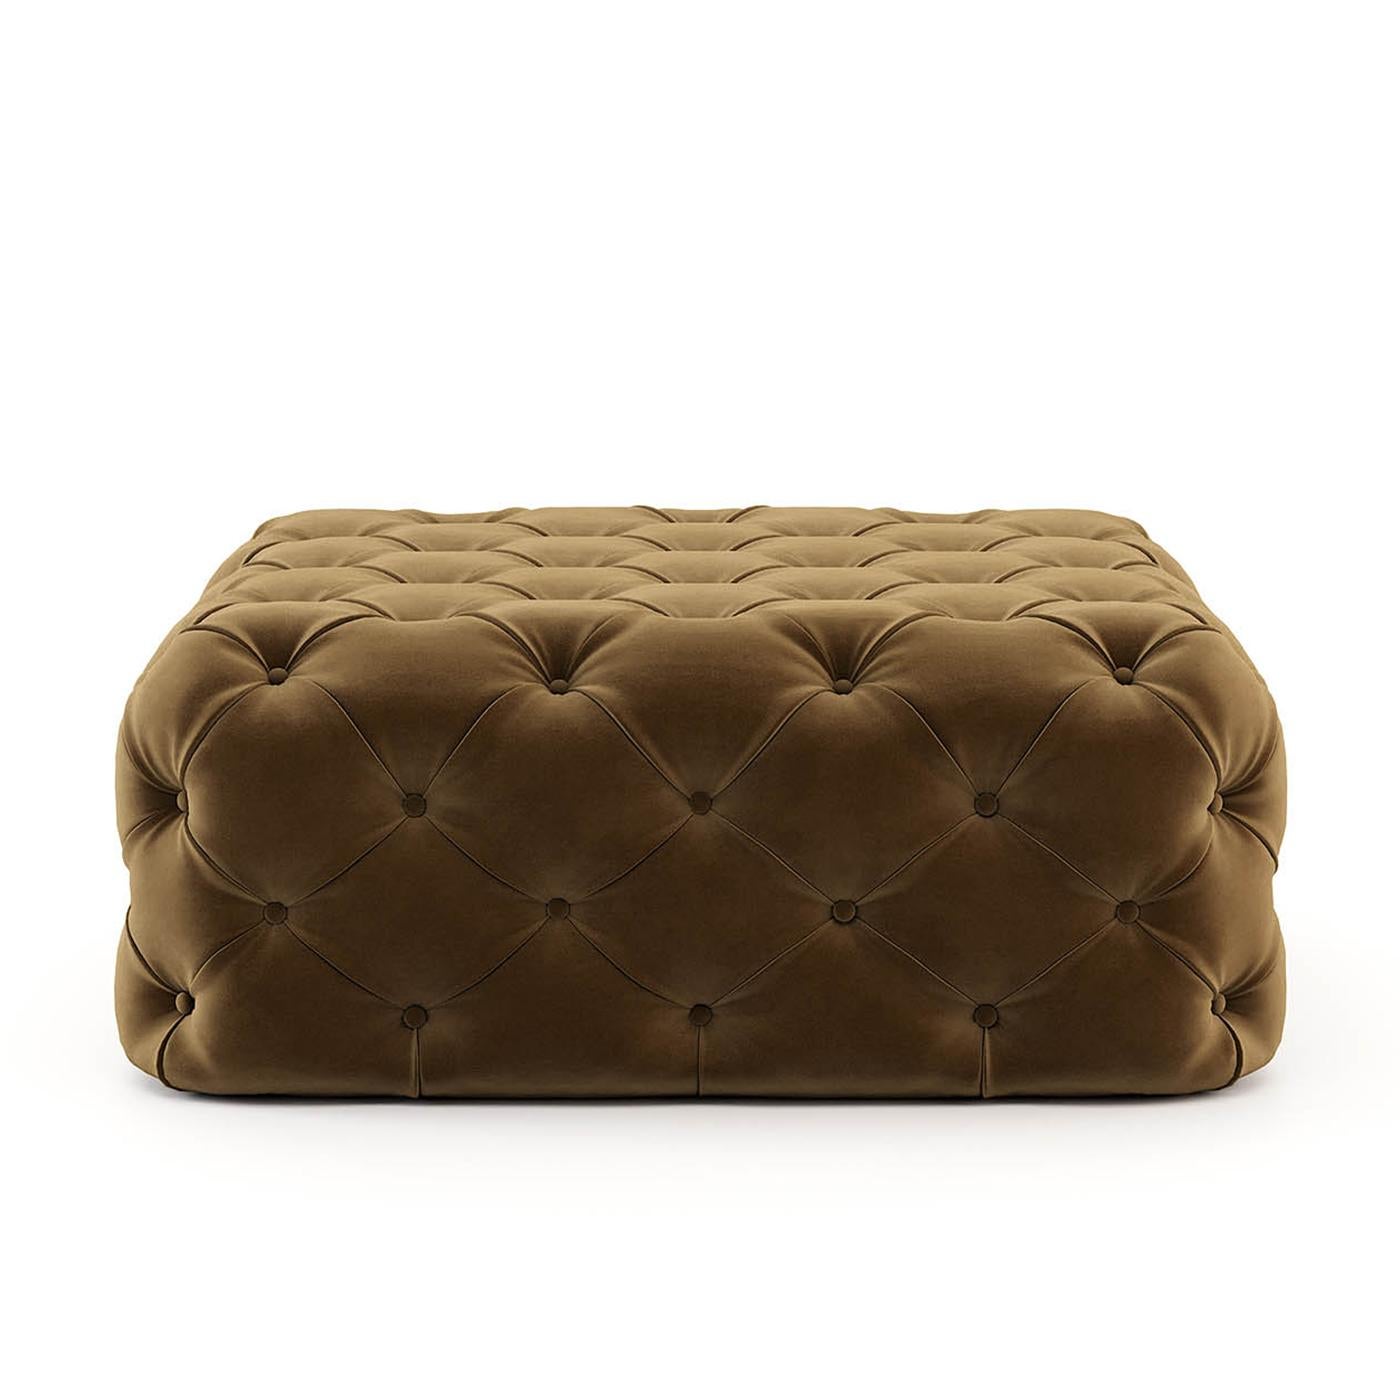 Pouf divine with wooden structure, upholstered
and capitonated covered with buttons in velvet fabric.
Also available with other fabrics on request.